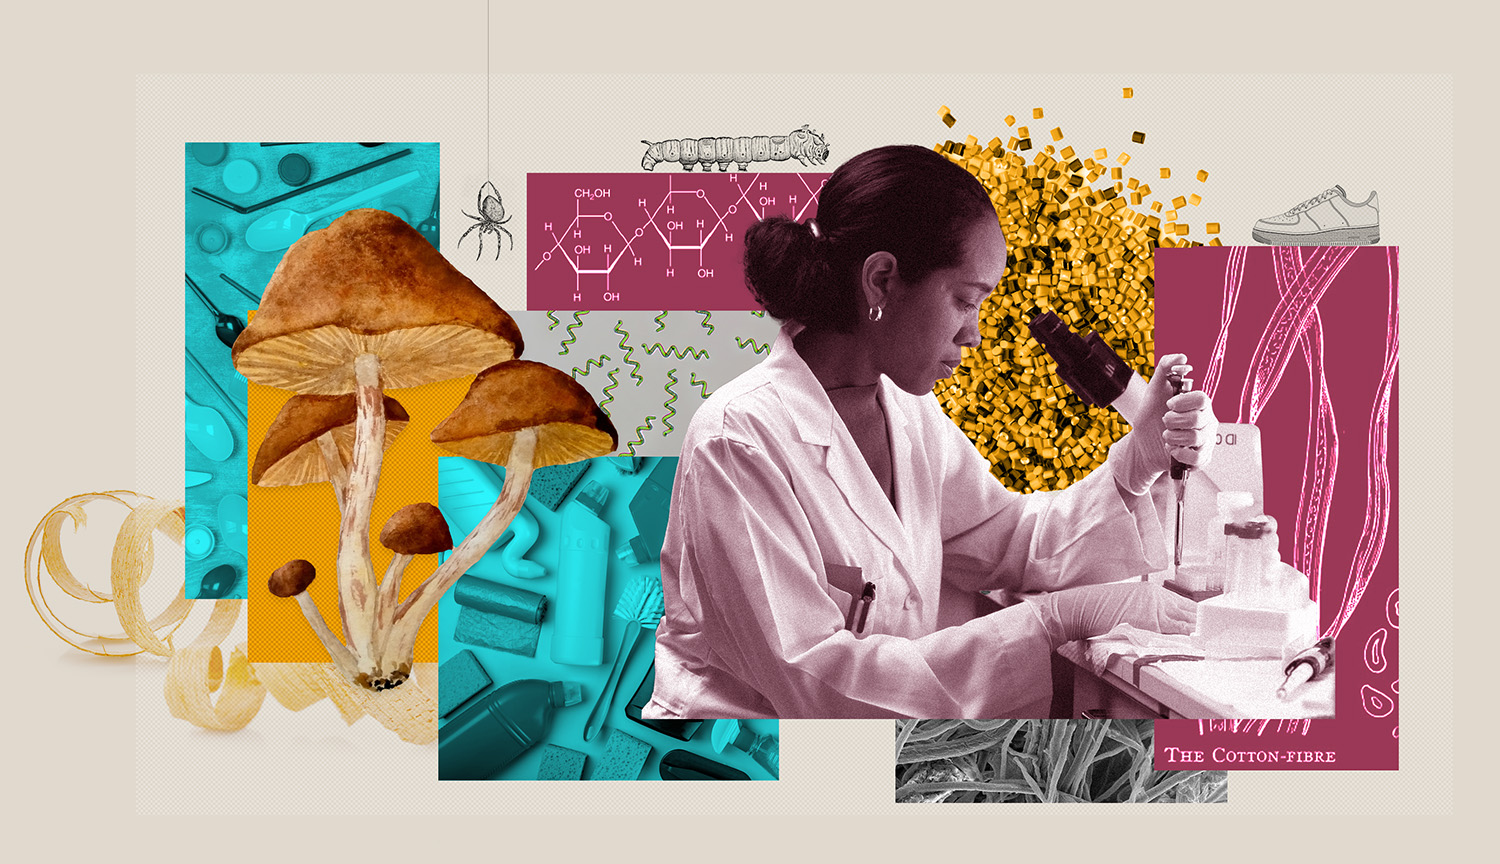 A collage shows a scientist using a pipet as well as various polymers and natural materials.